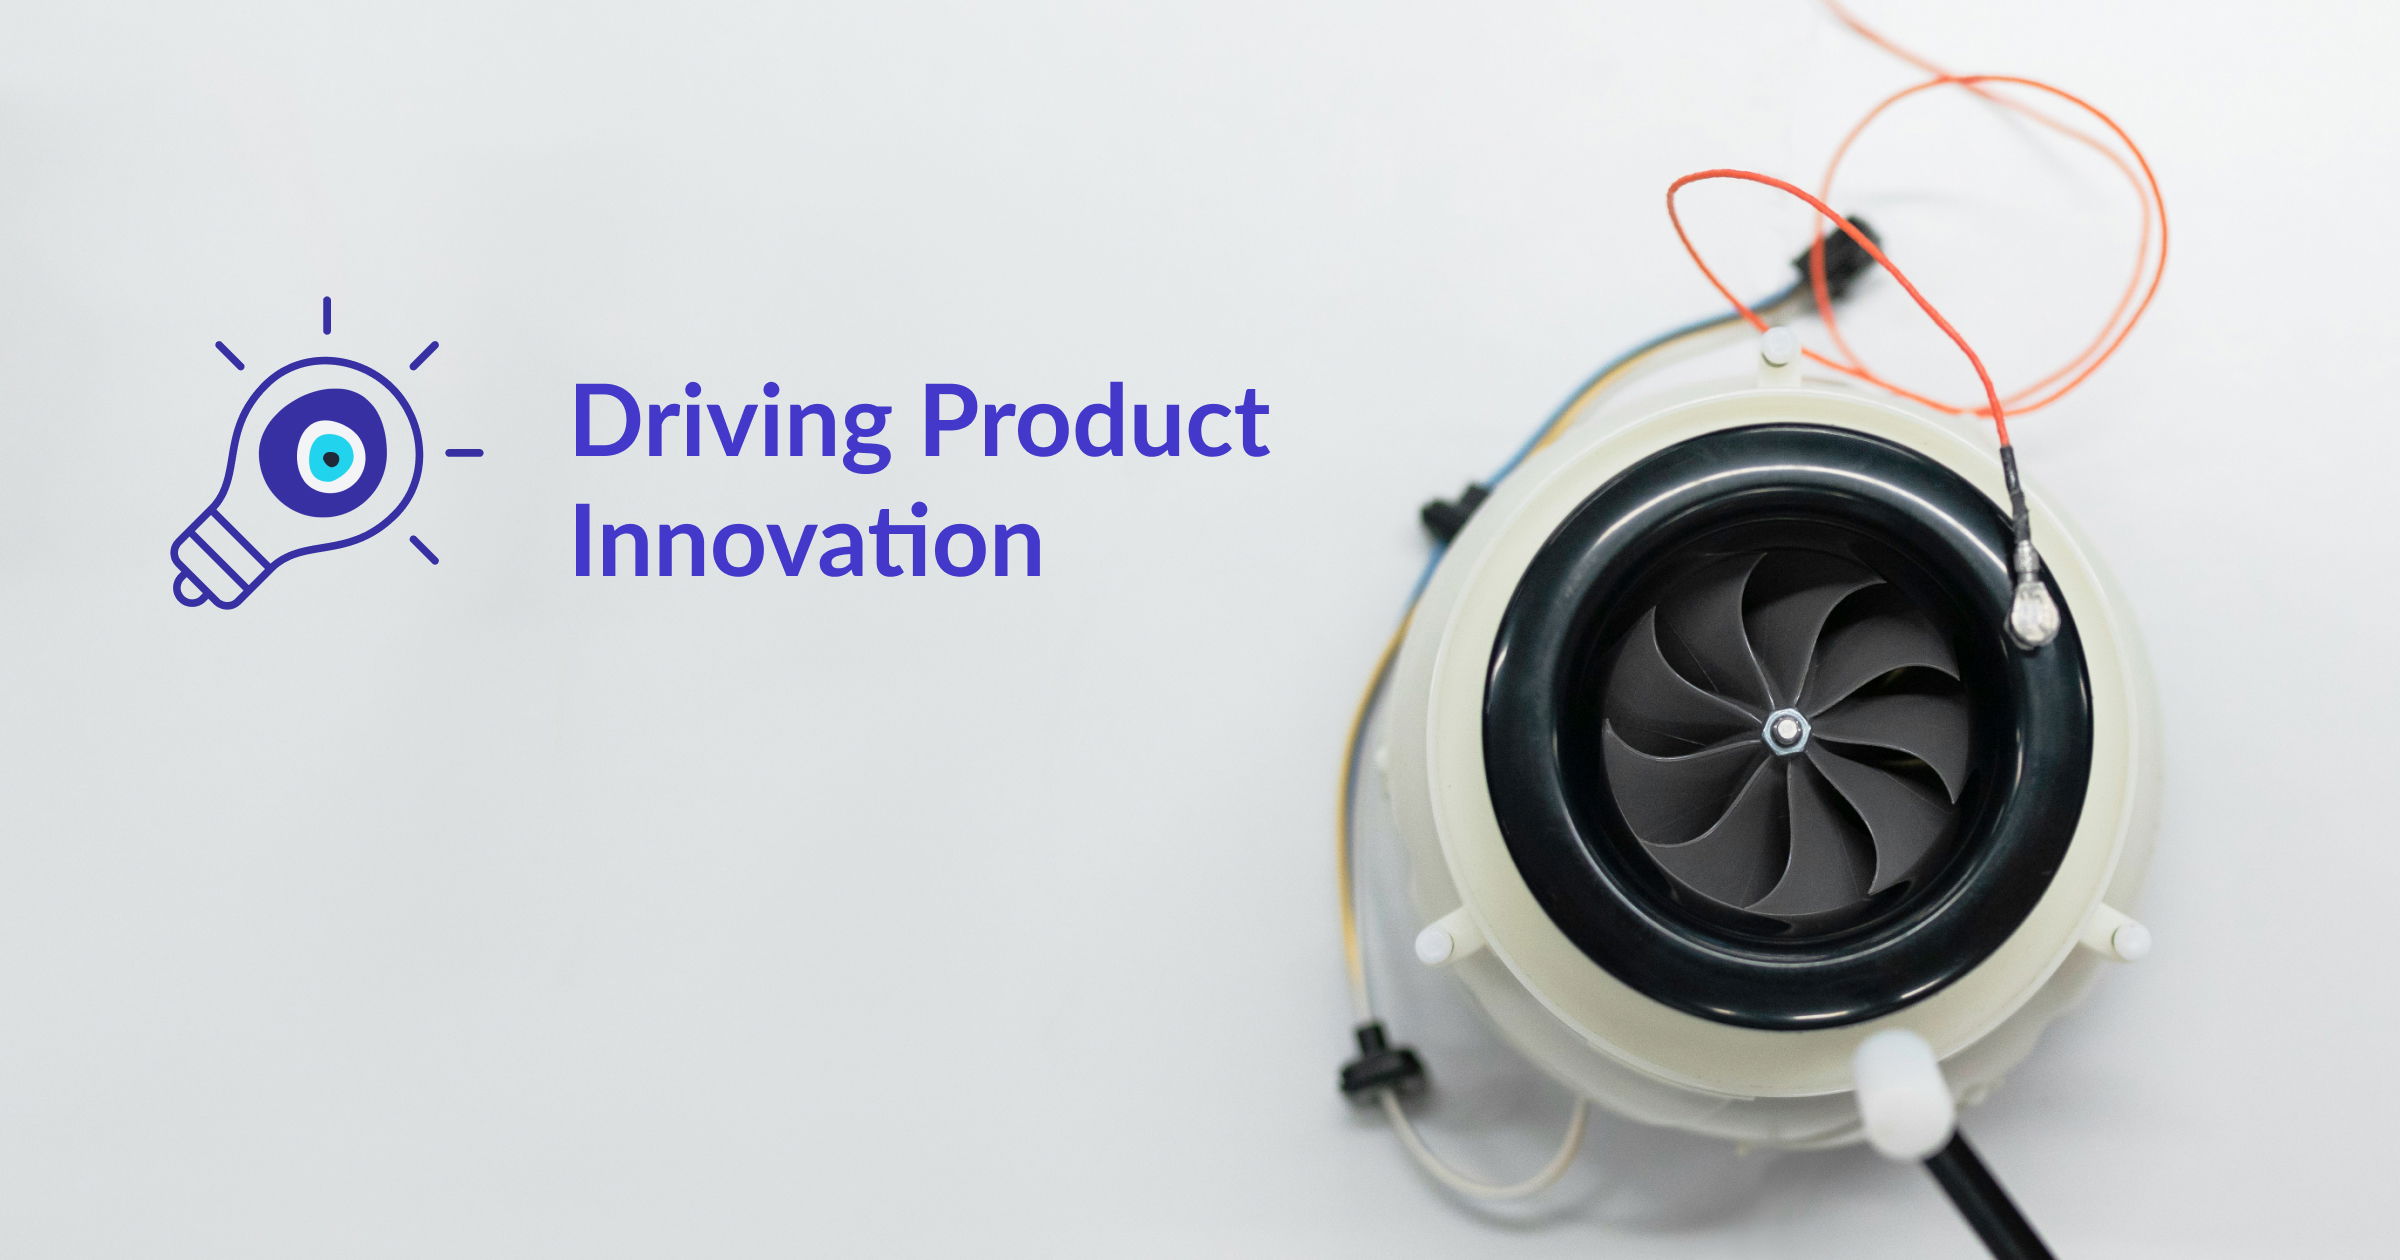 Text saying "Driving Product Innovation" and image of a piece of engineering